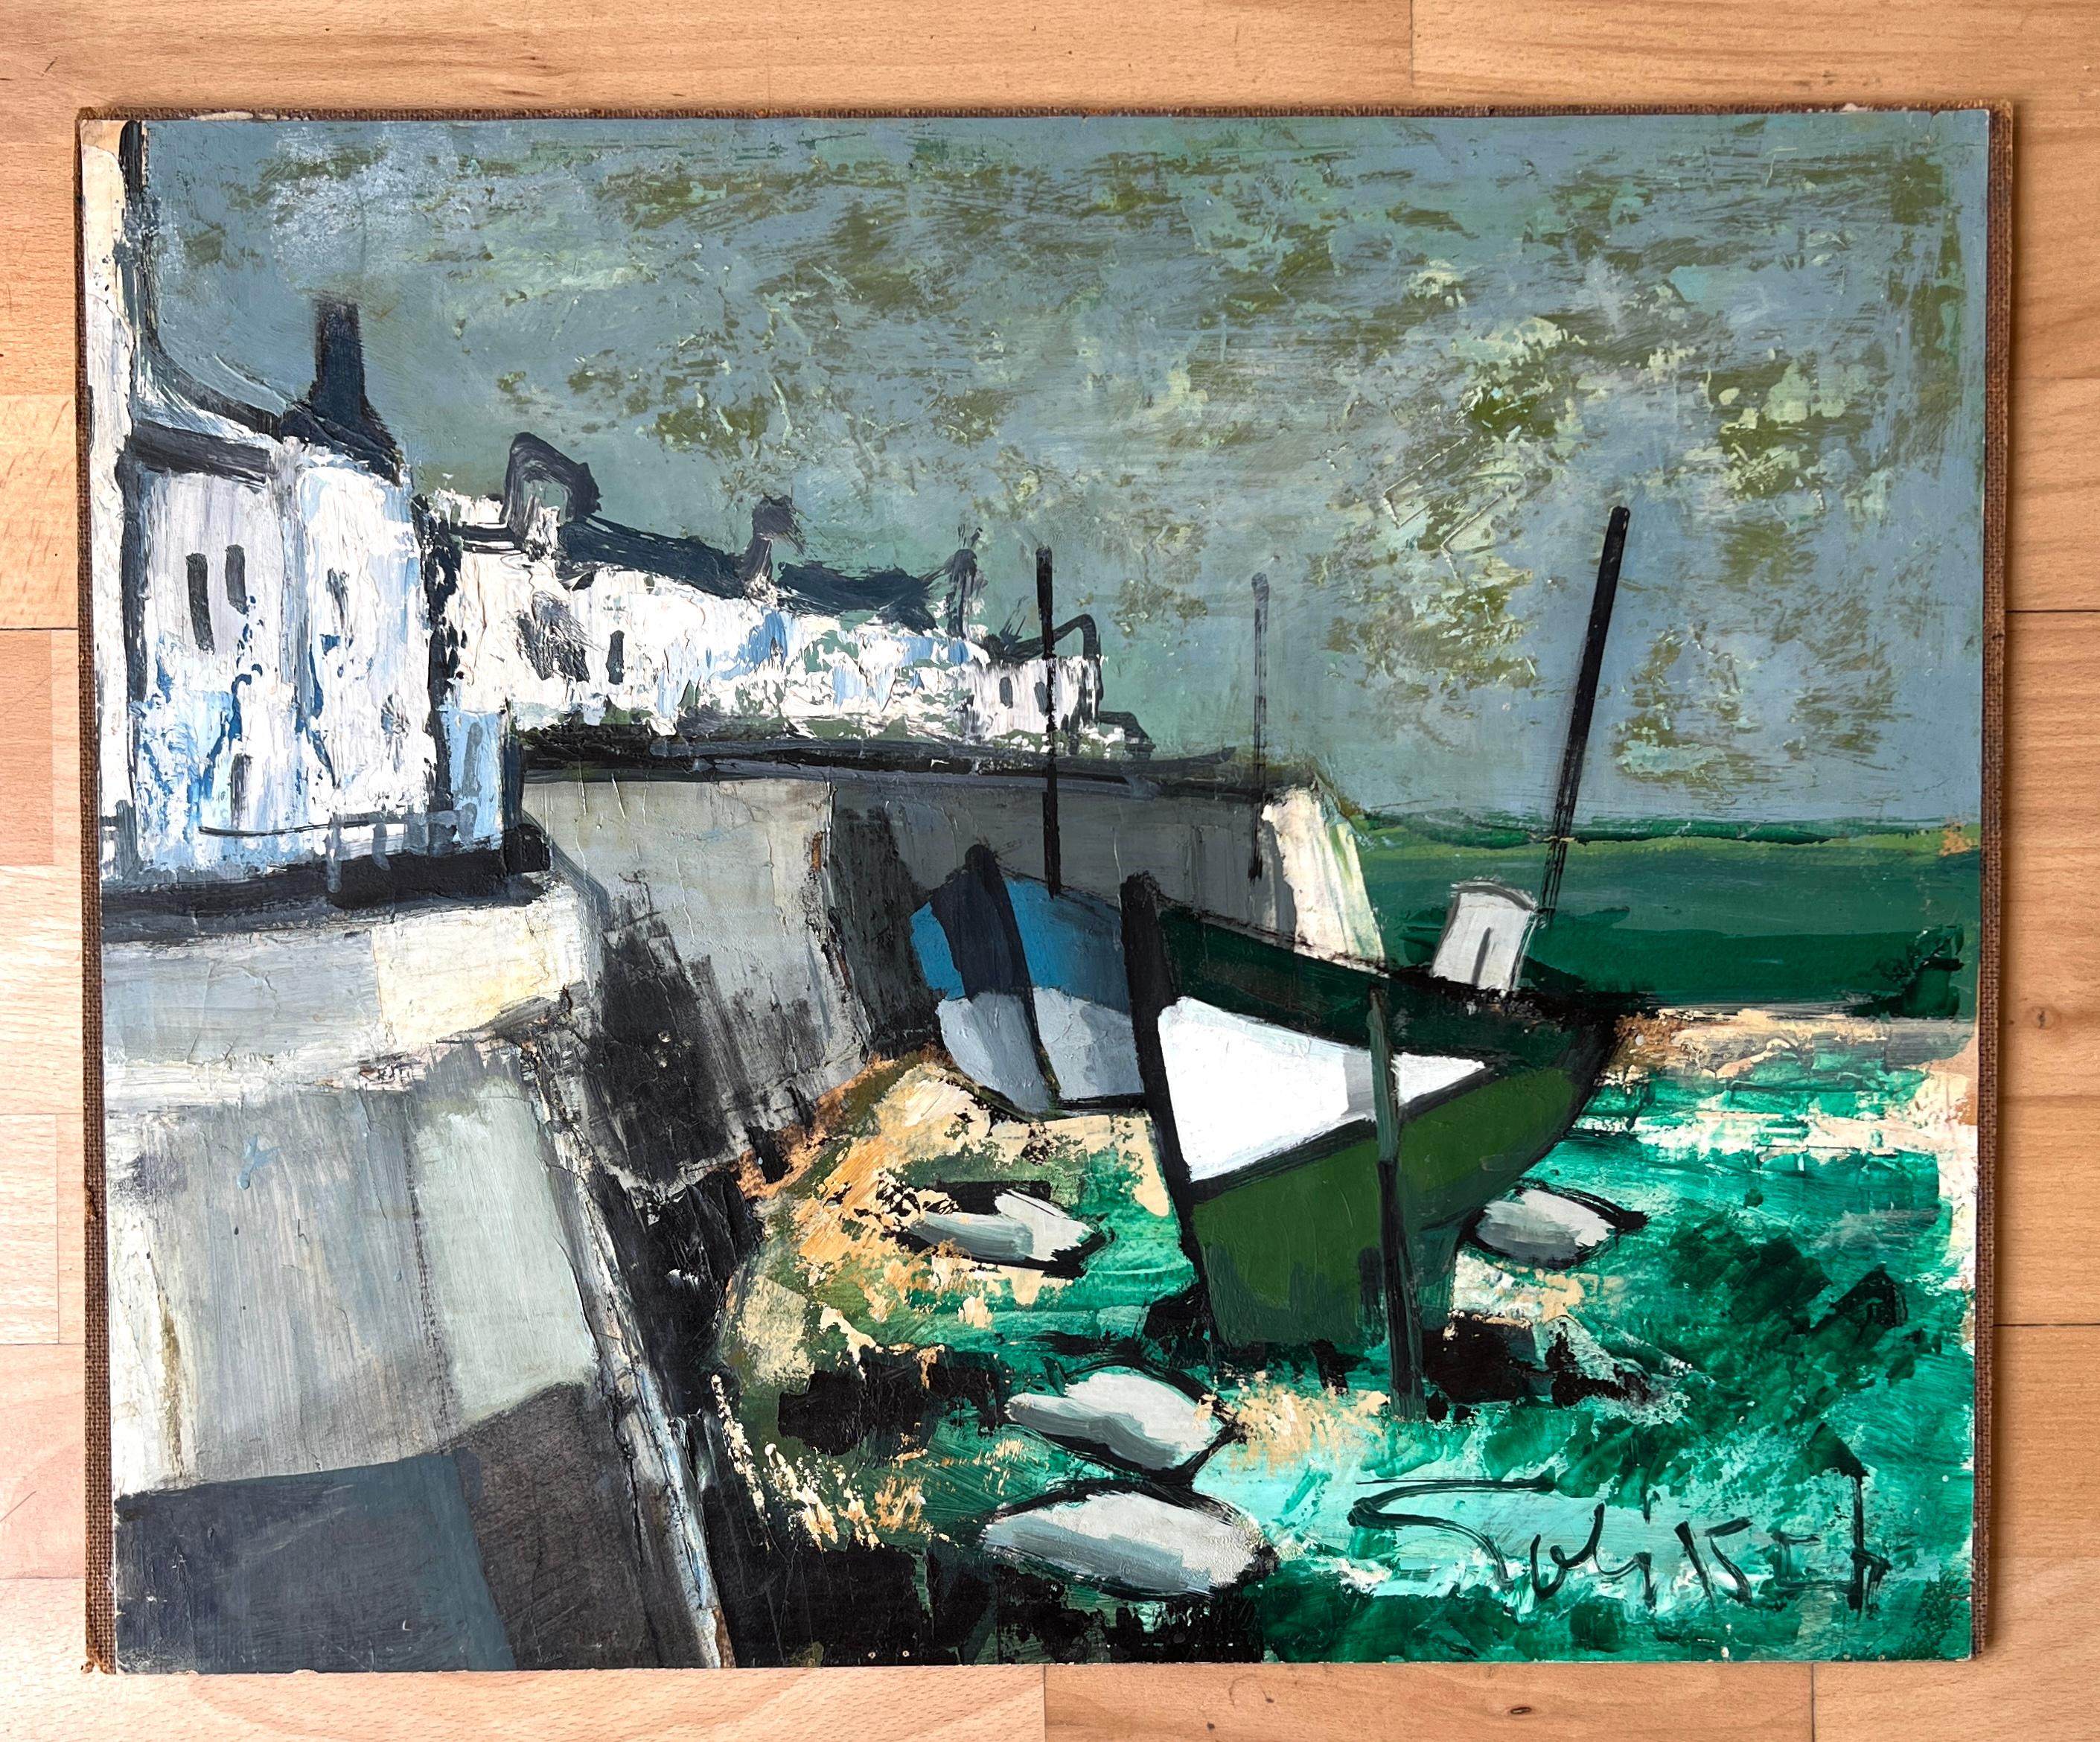 Seaside, Brittany - Painting by William Goliasch